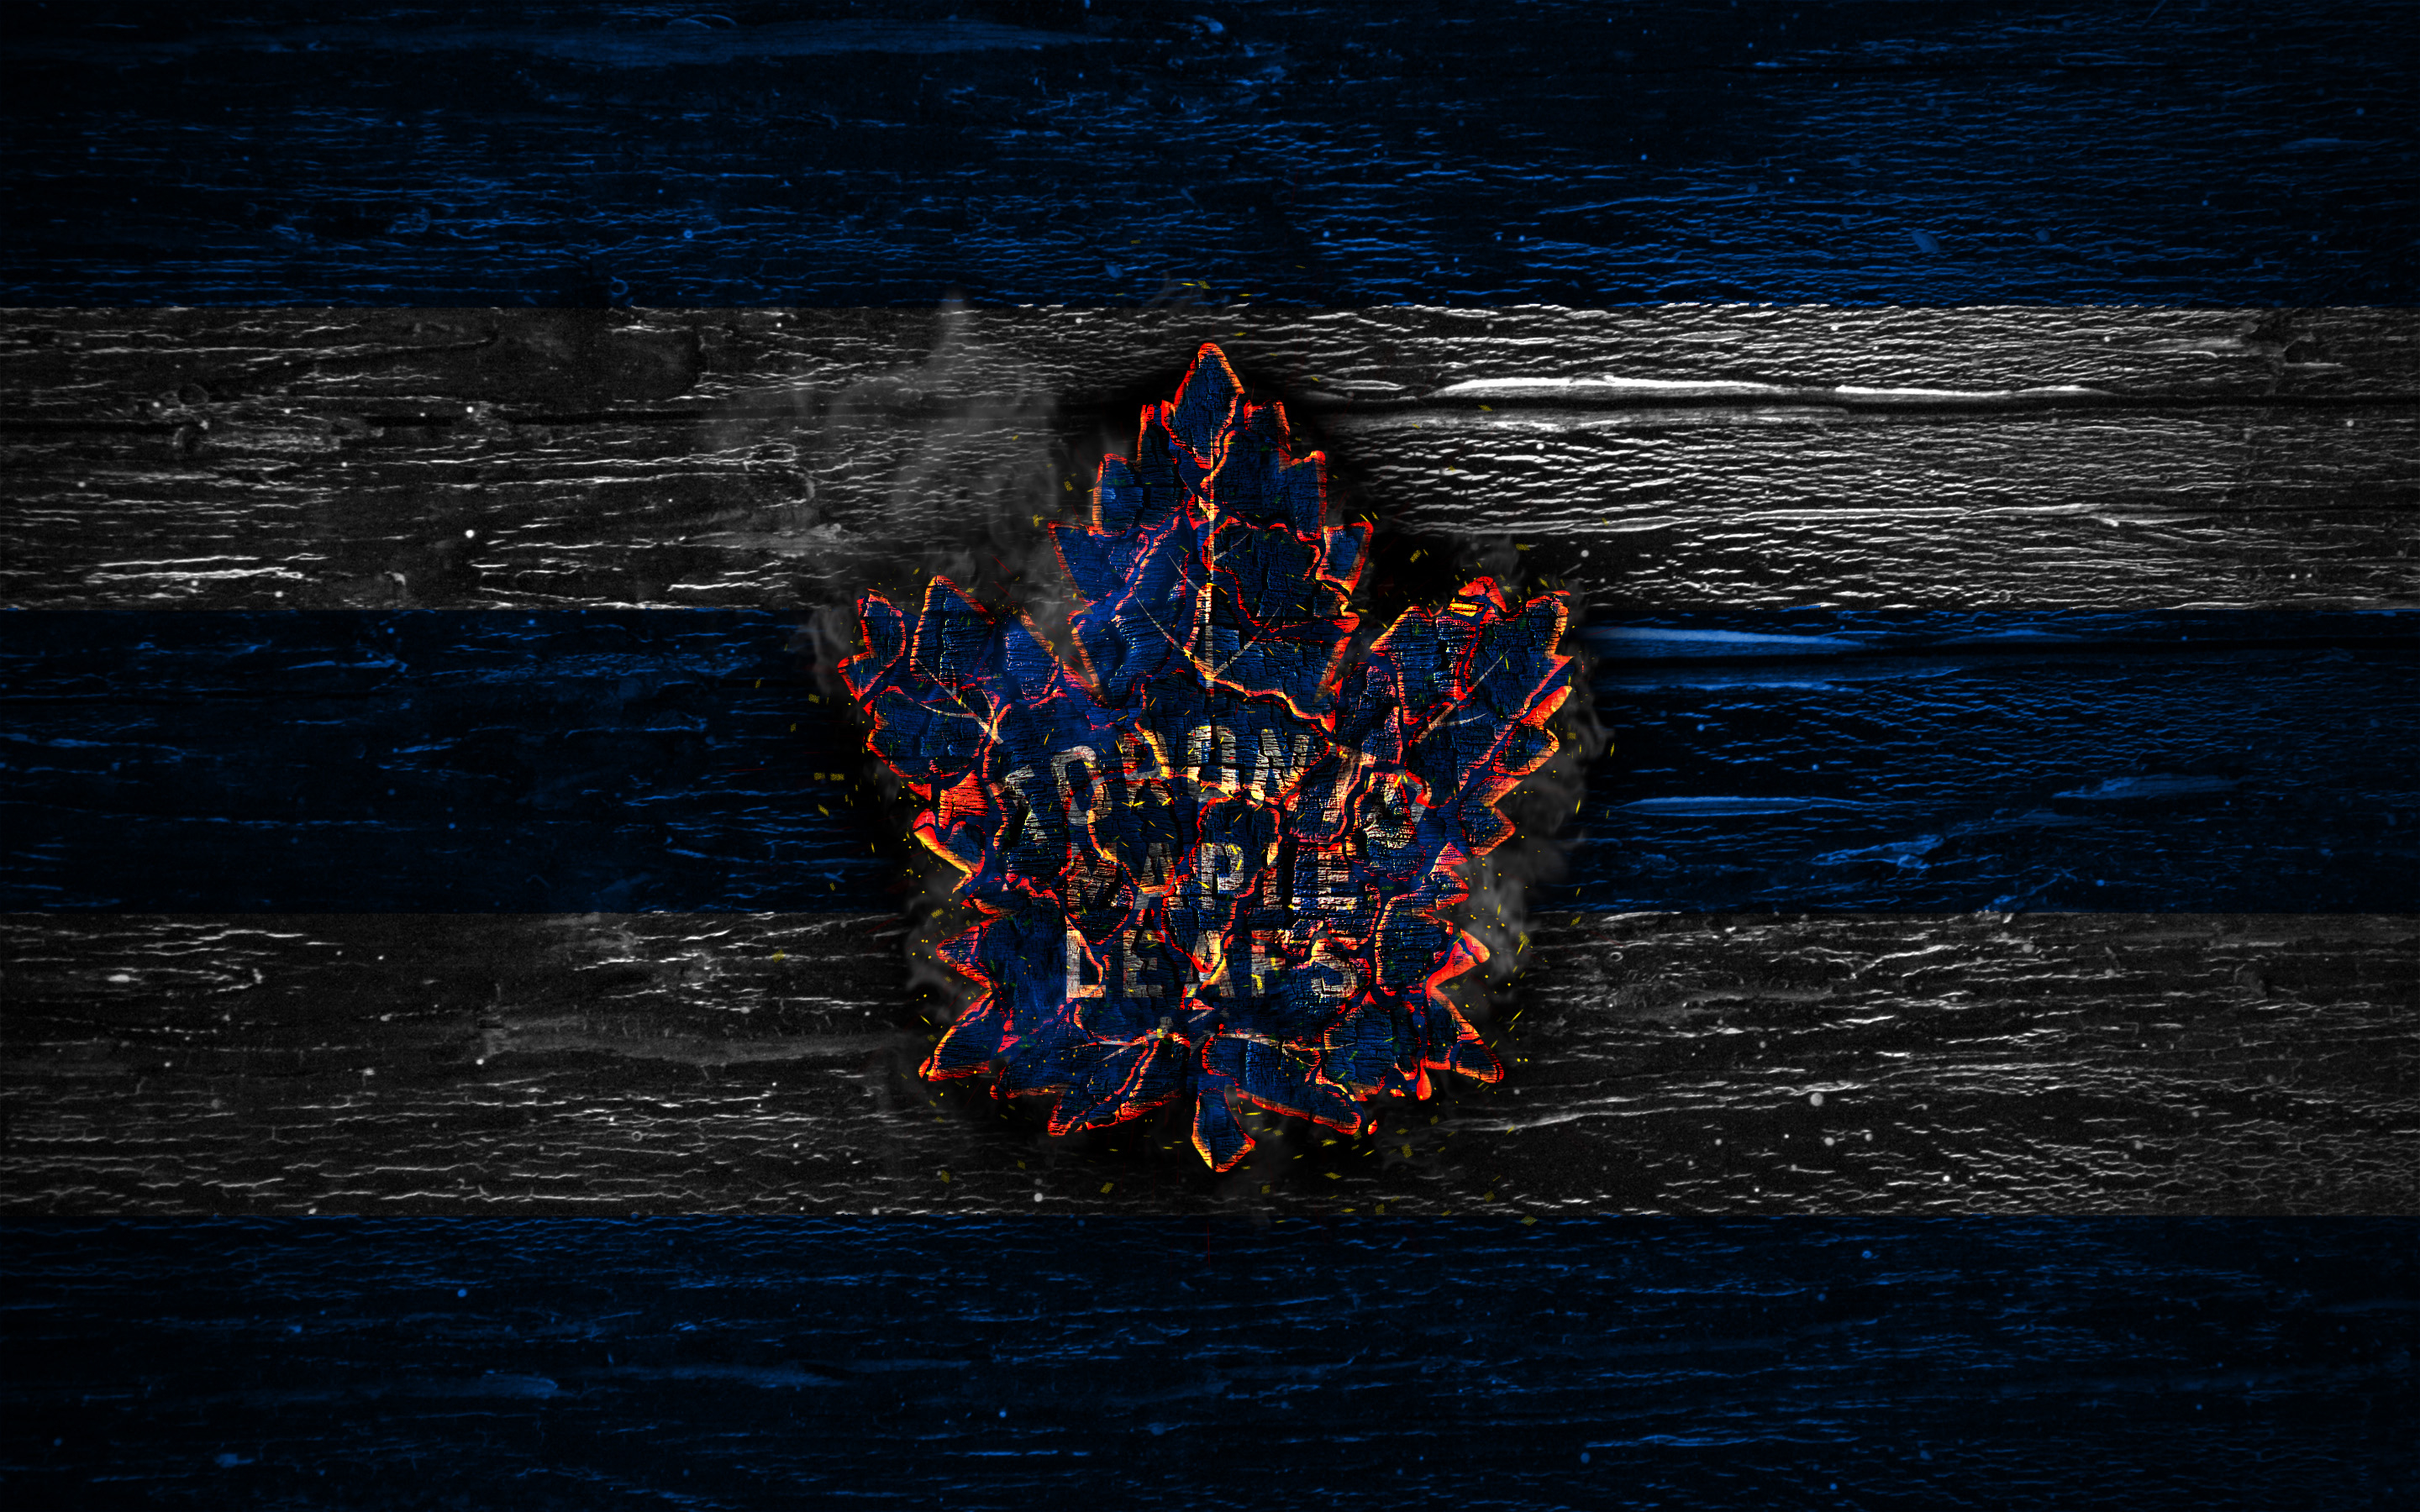 Toronto Maple Leafs on X: Add some blue to your 📱 background on  #WallpaperWednesday. #LeafsForever  / X